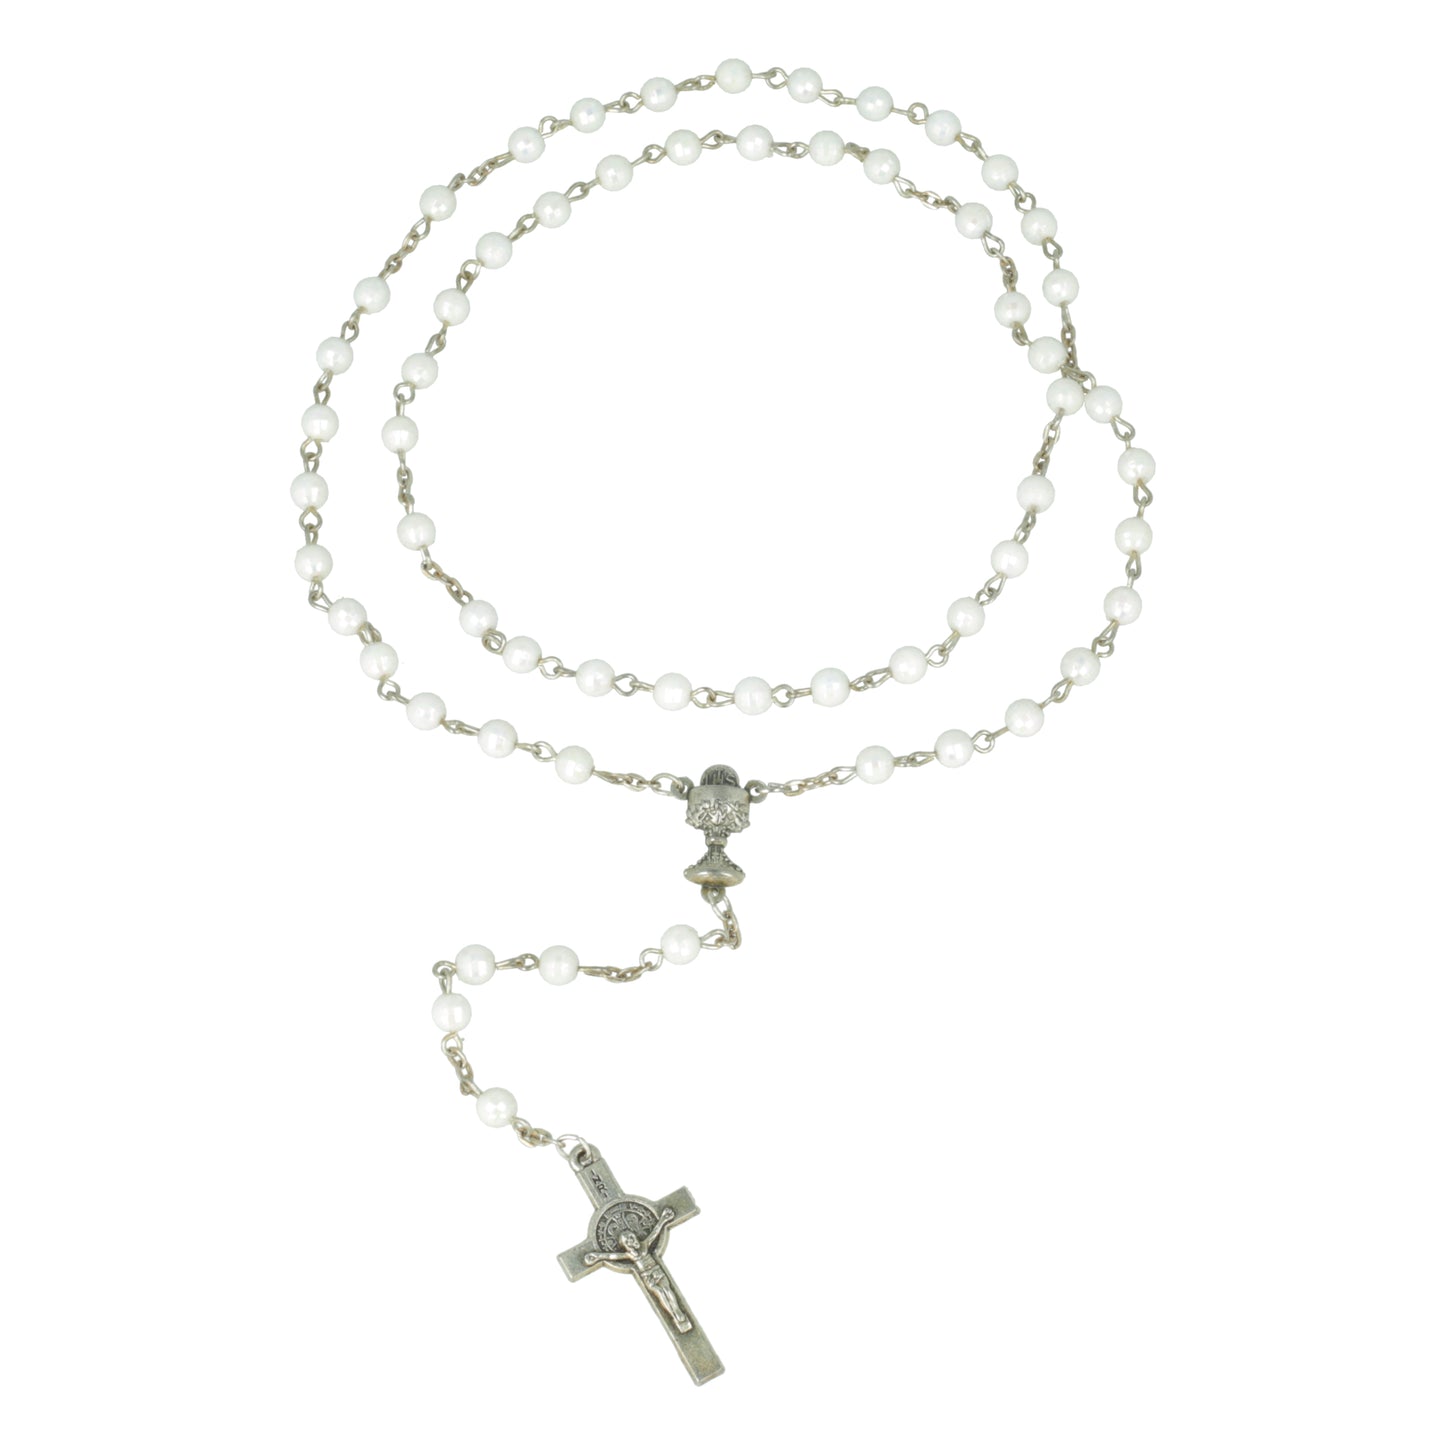 Rosary Communion White Nacarina Oval. Souvenirs from Italy